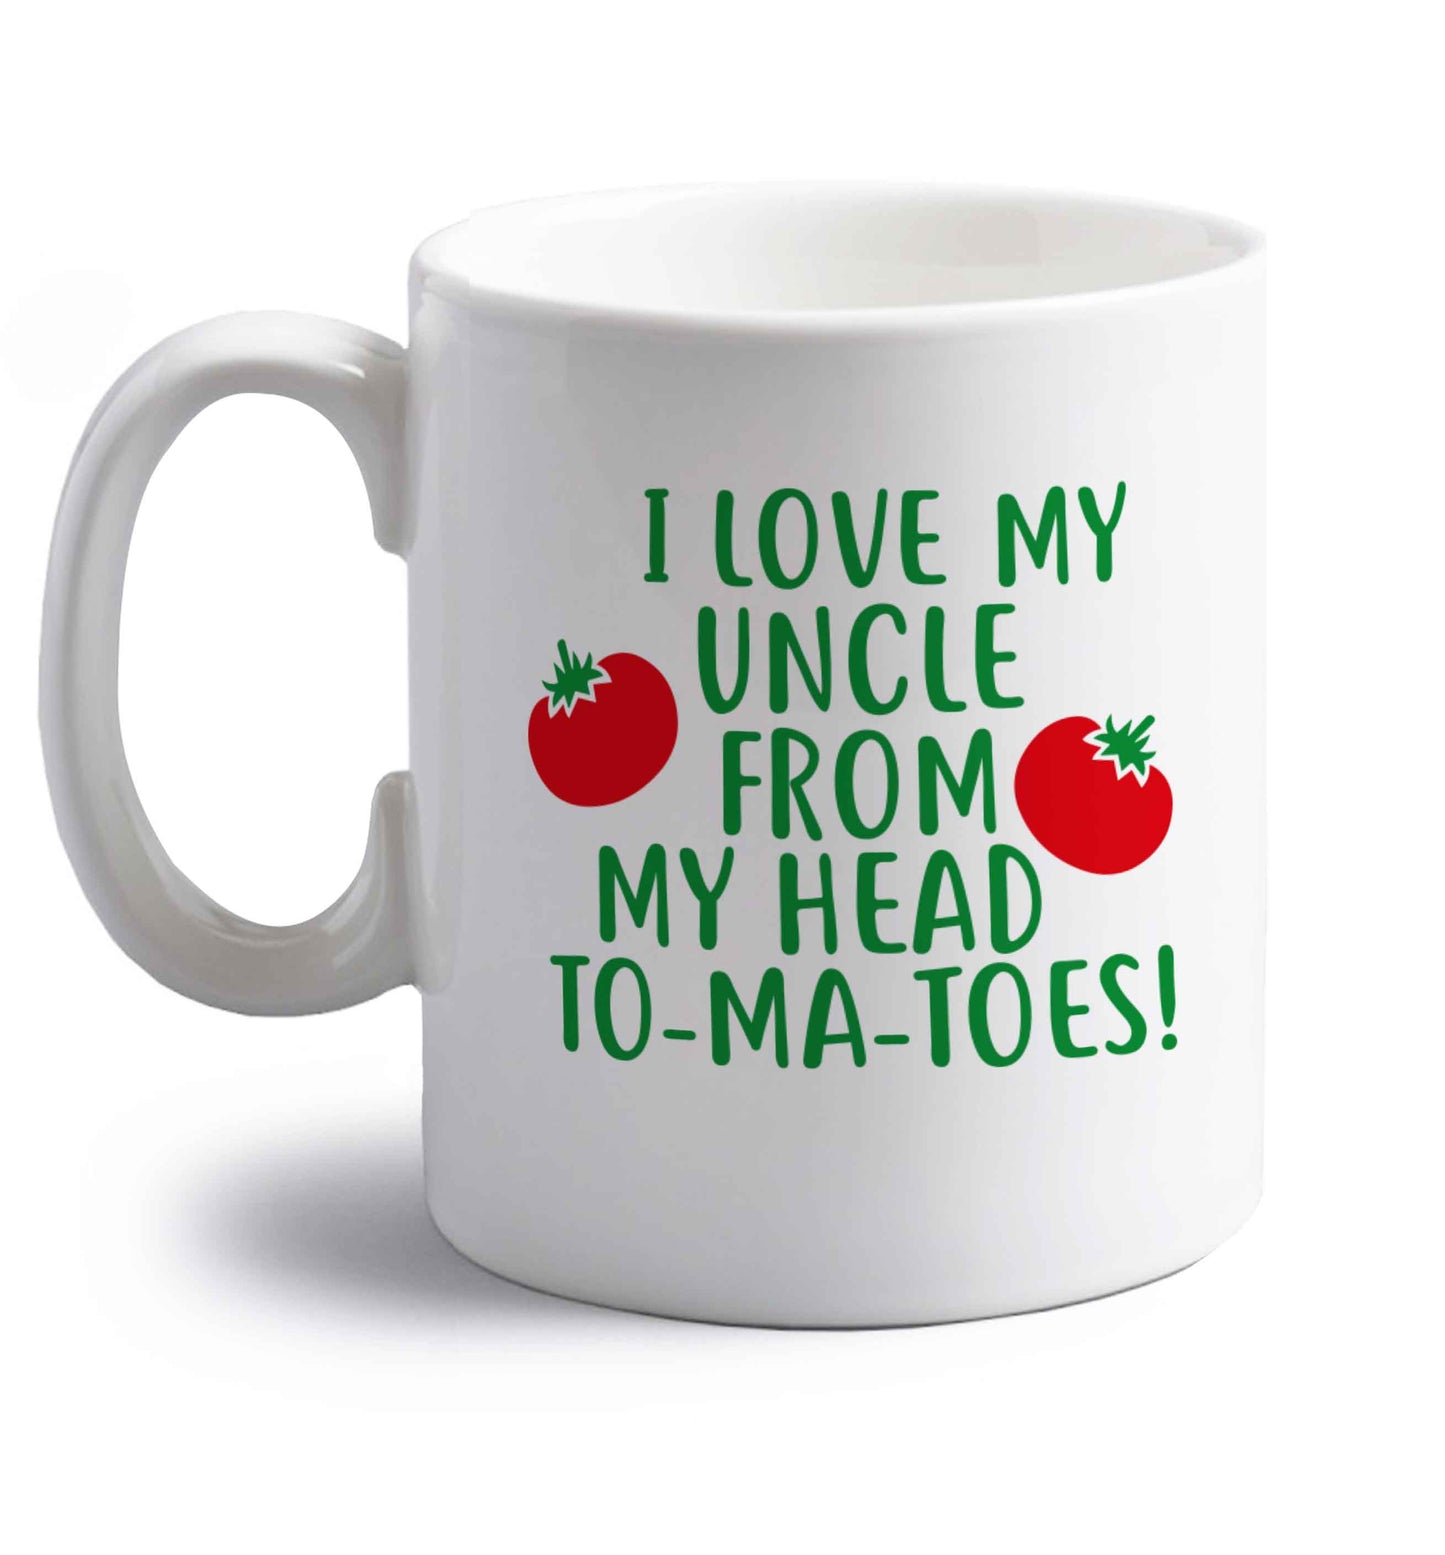 I love my uncle from my head To-Ma-Toes right handed white ceramic mug 